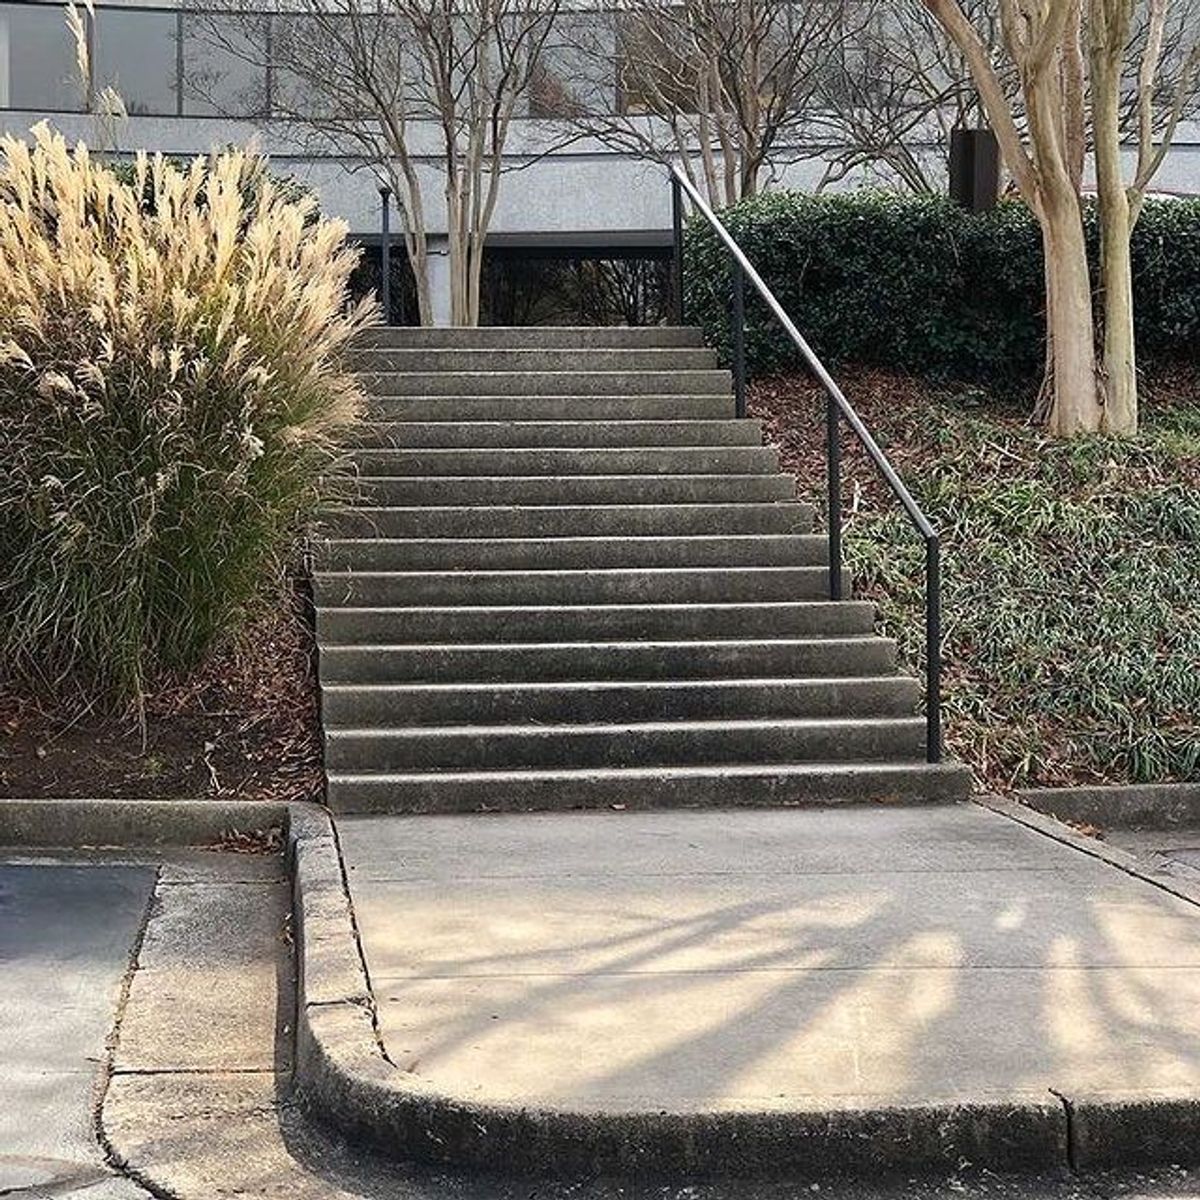 Image for skate spot IRS 15 Stair Rail